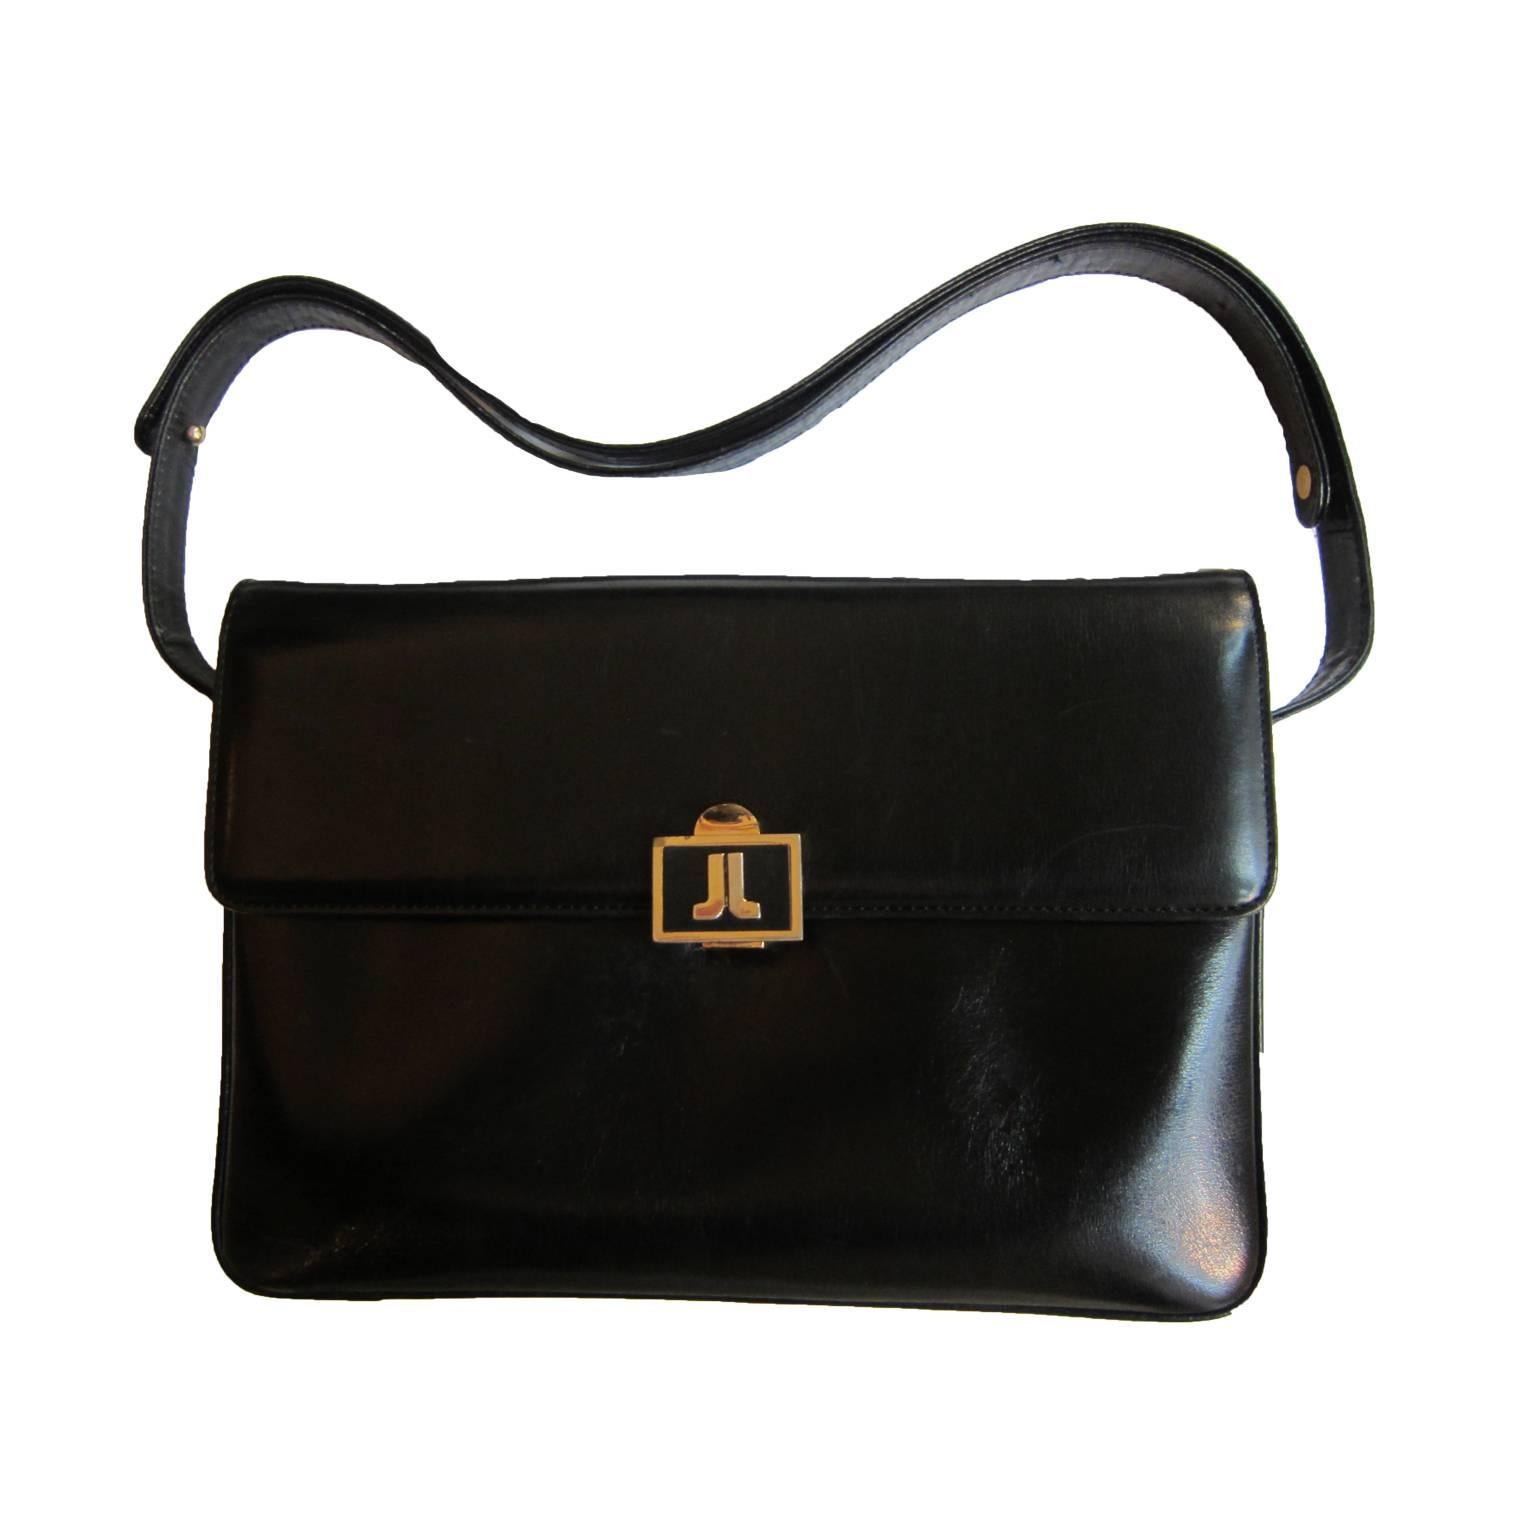 Lanvin vintage shoulder box bag in black leather. It has a beautifully crafted classic logo hard wear closure. 
Inside - divided in three compartments - the back compartment features a zipper side pocket, the middle compartment offers one with long